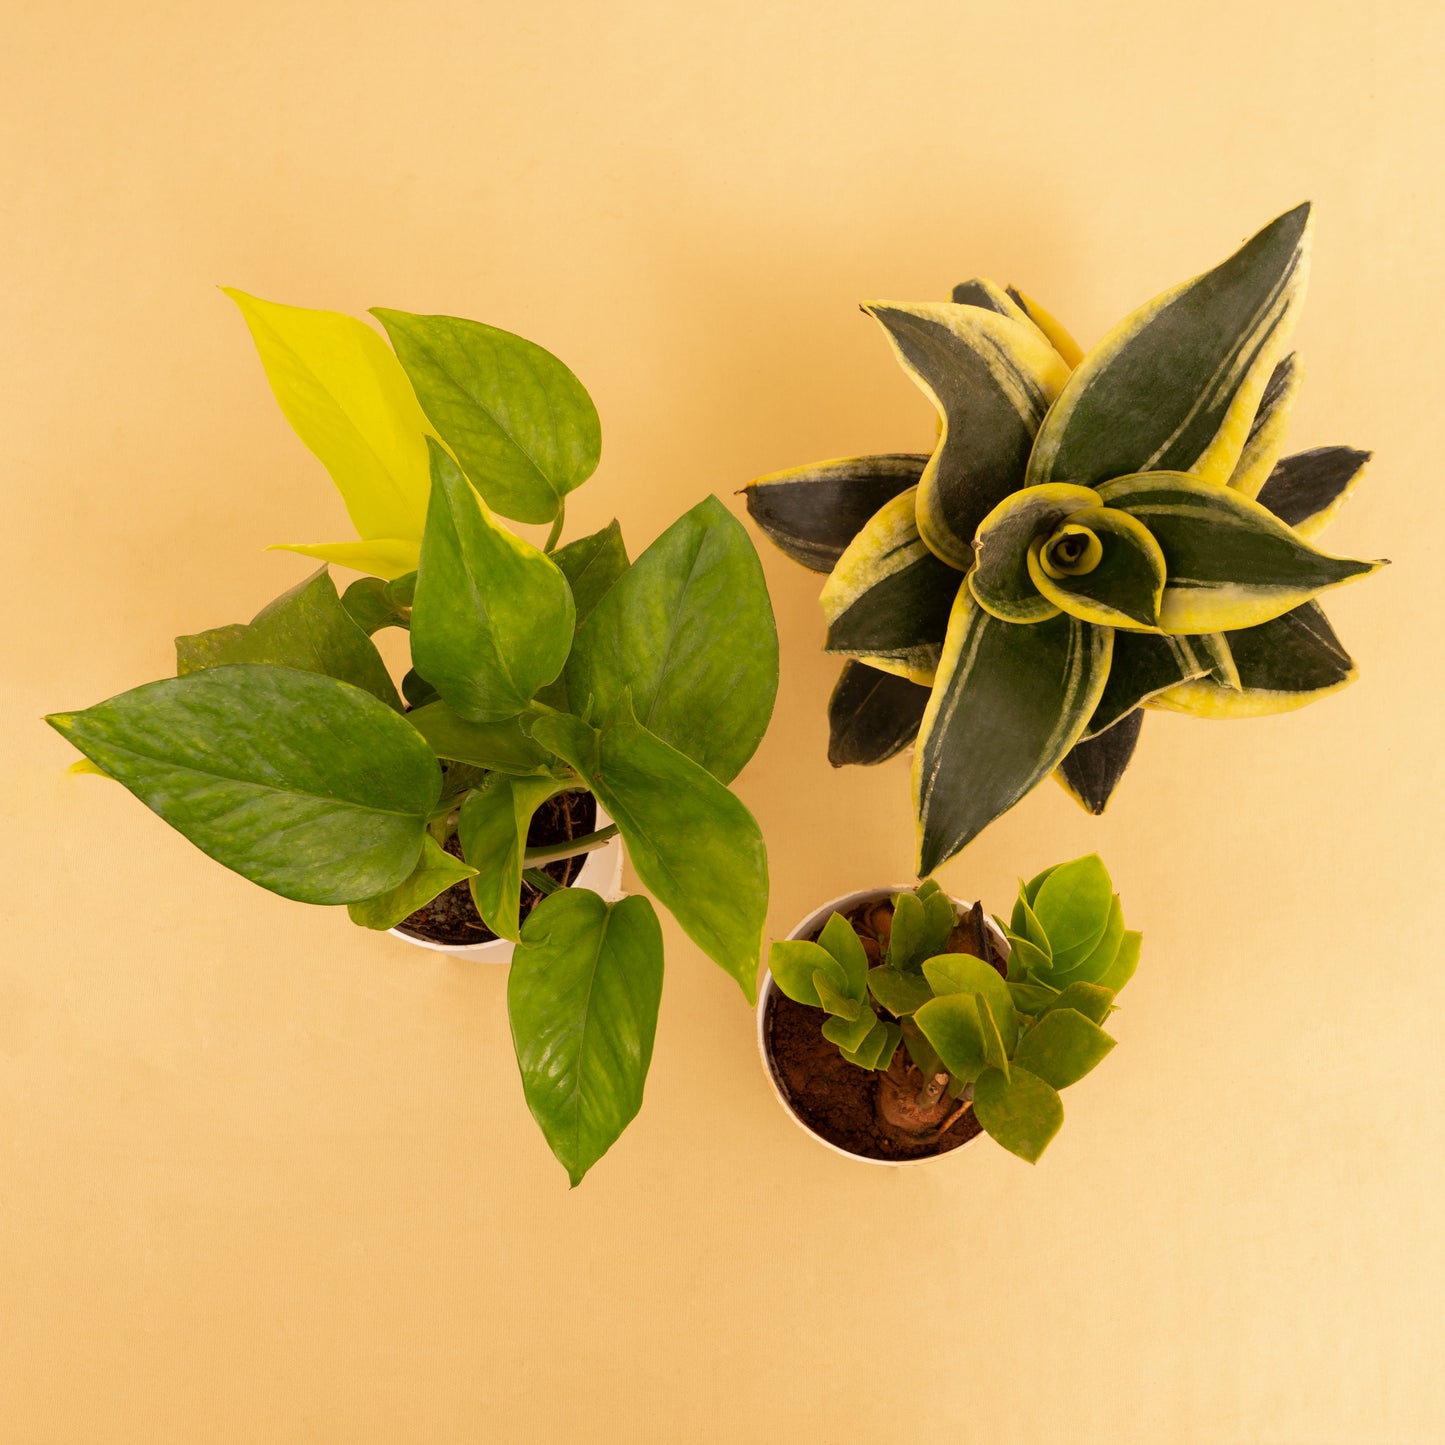 Hardy Combo of Money Variegated, Zamia Green & Golden Hahnii Snake plant With Self-Watering pot